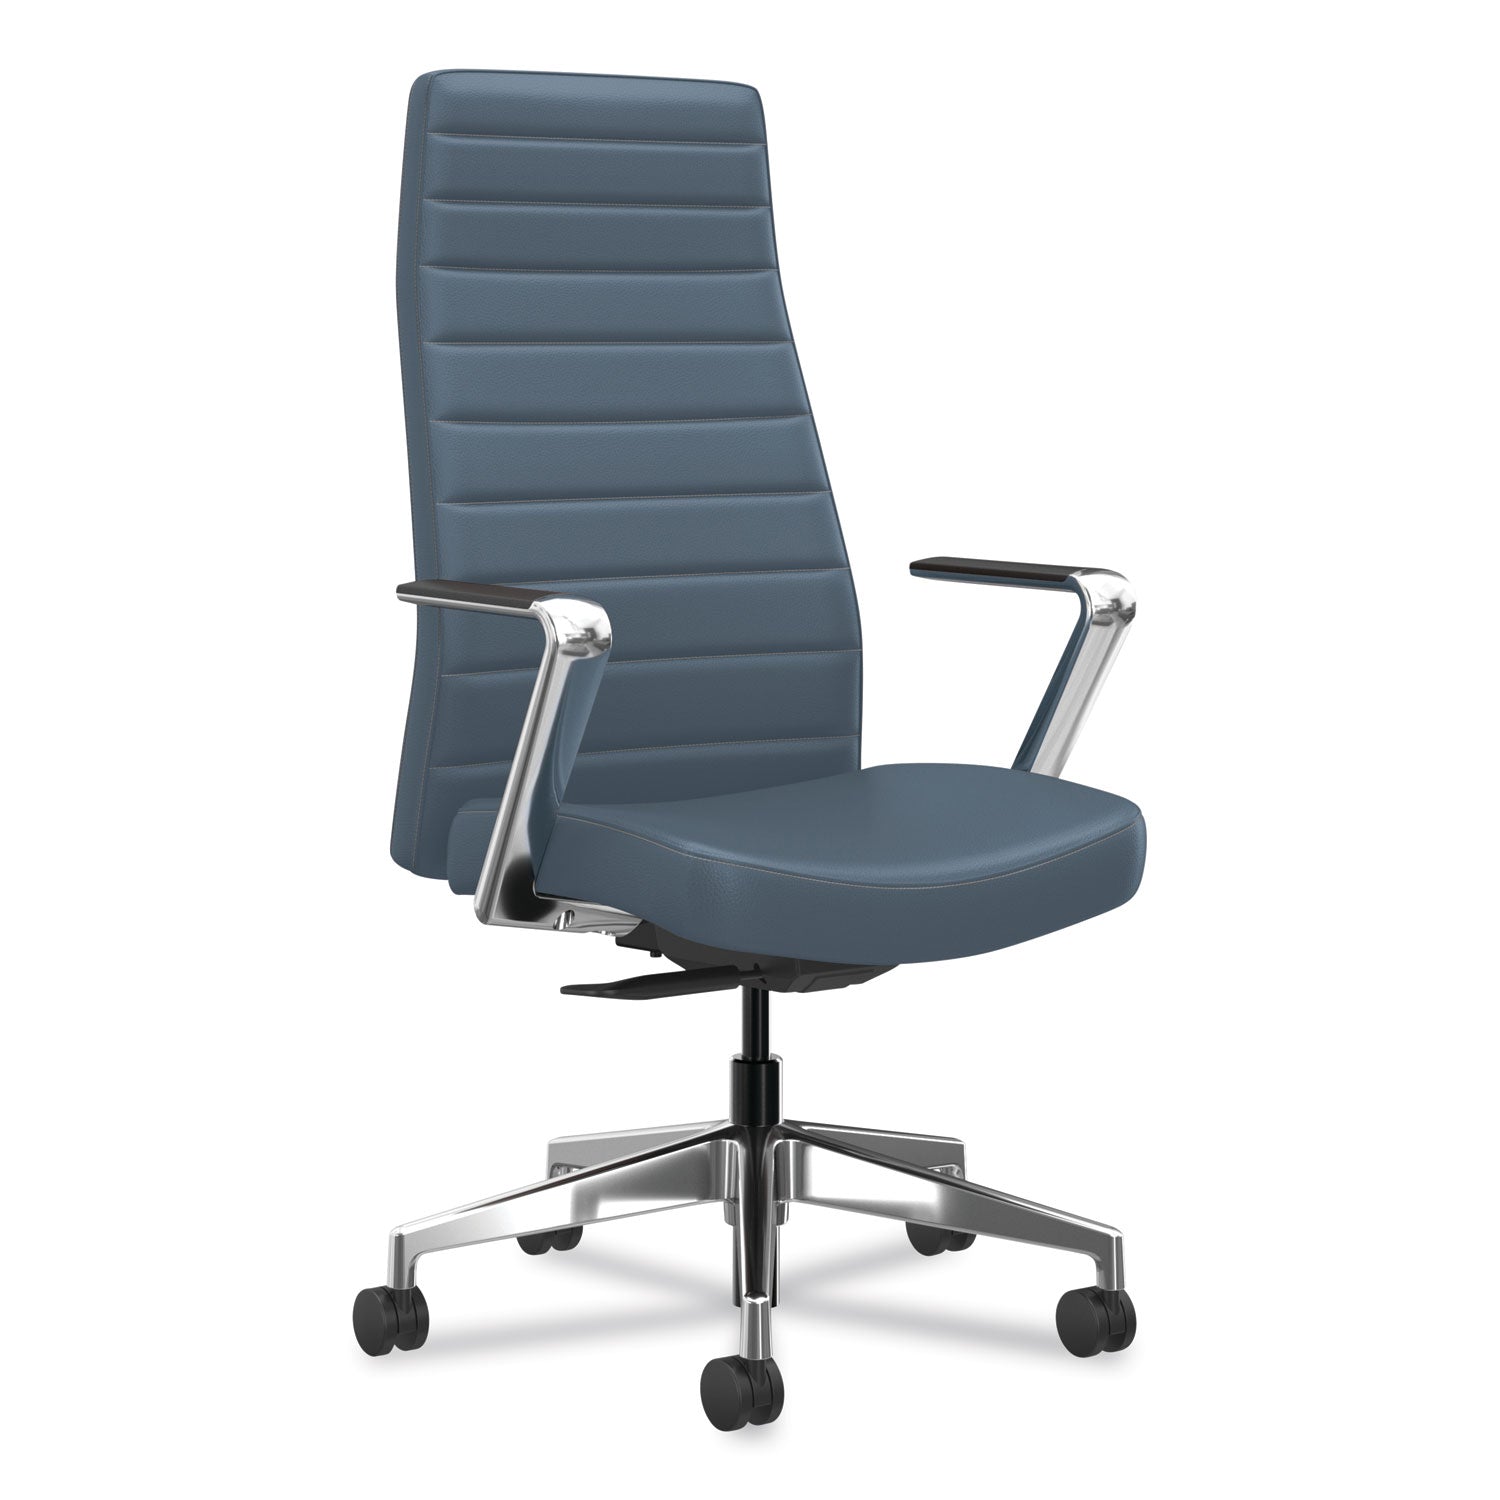 cofi-executive-high-back-chair-supports-up-to-300-lb-nimbus-seat-back-polished-aluminum-base-ships-in-7-10-business-days_honceuw0pu93c9p - 1